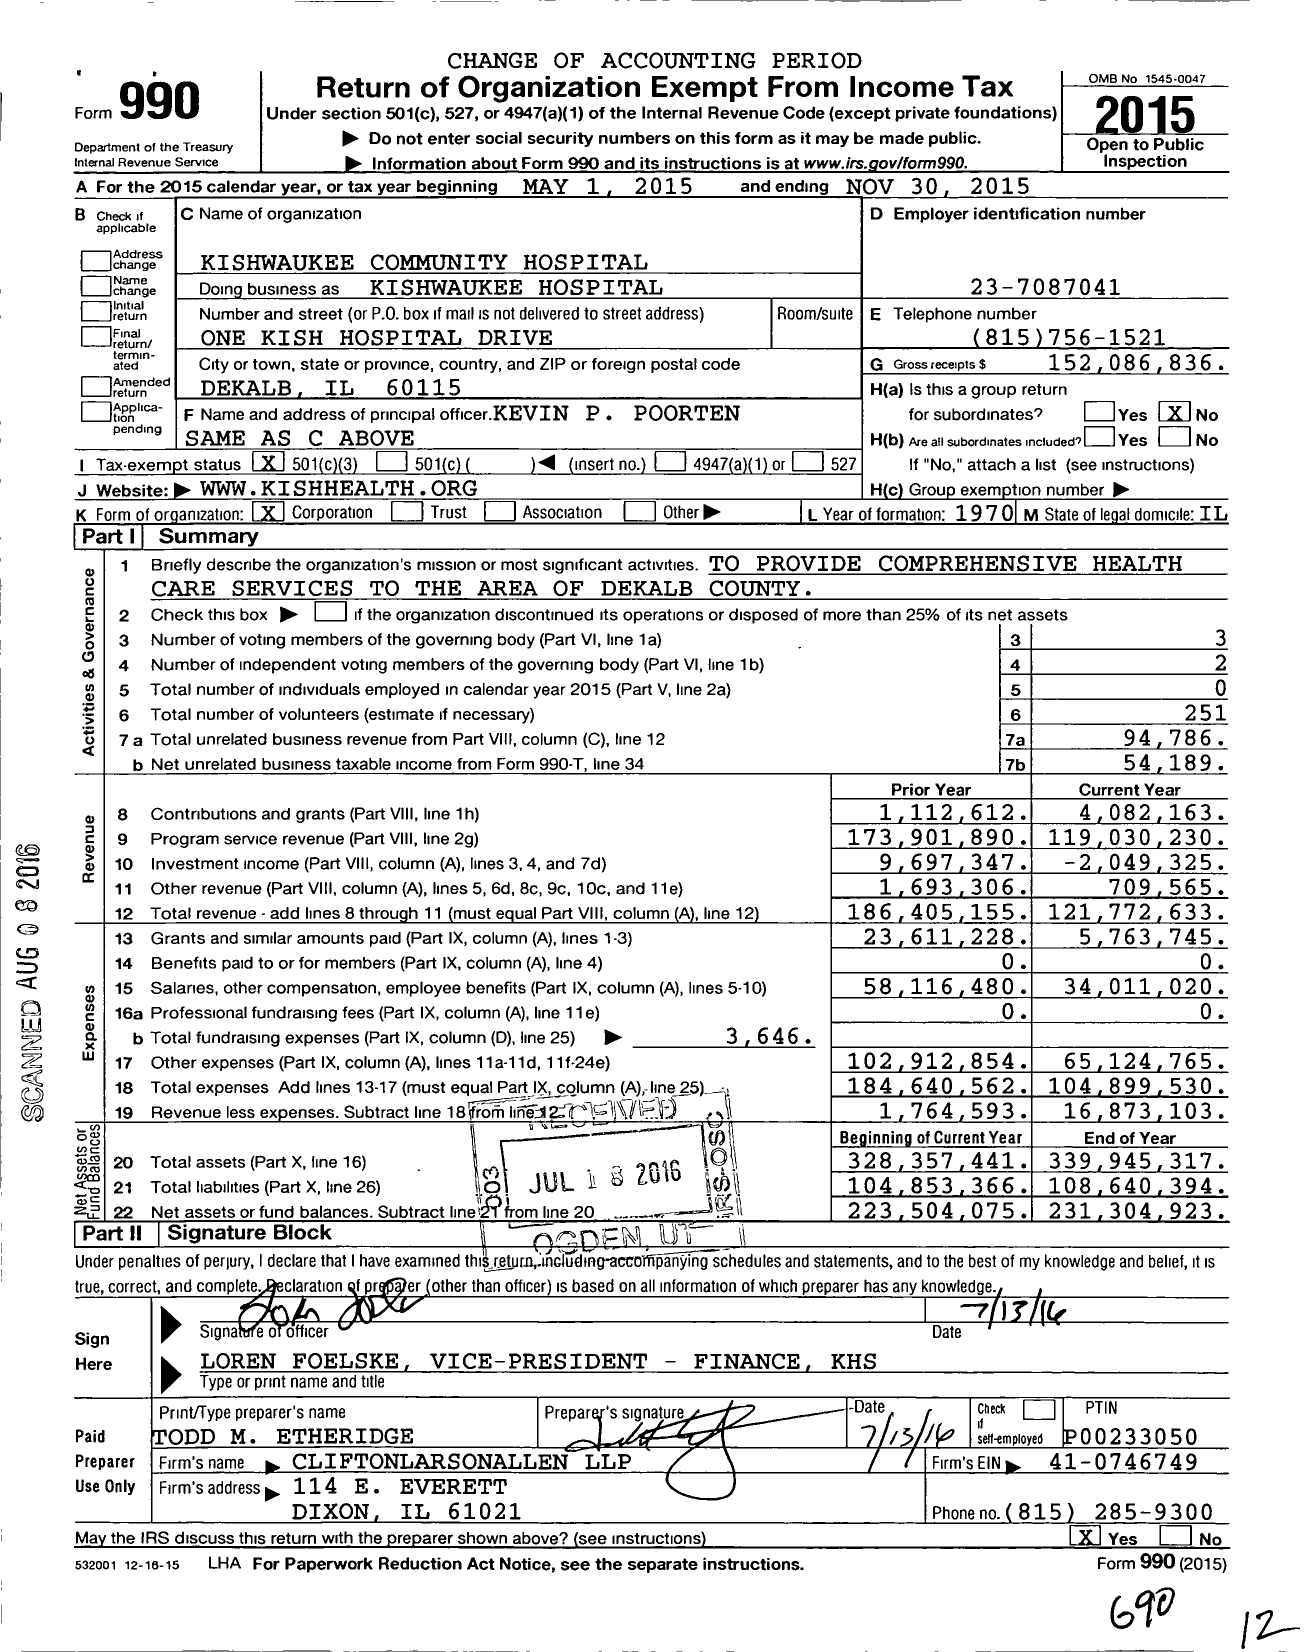 Image of first page of 2014 Form 990 for Kishwaukee Community Hospital